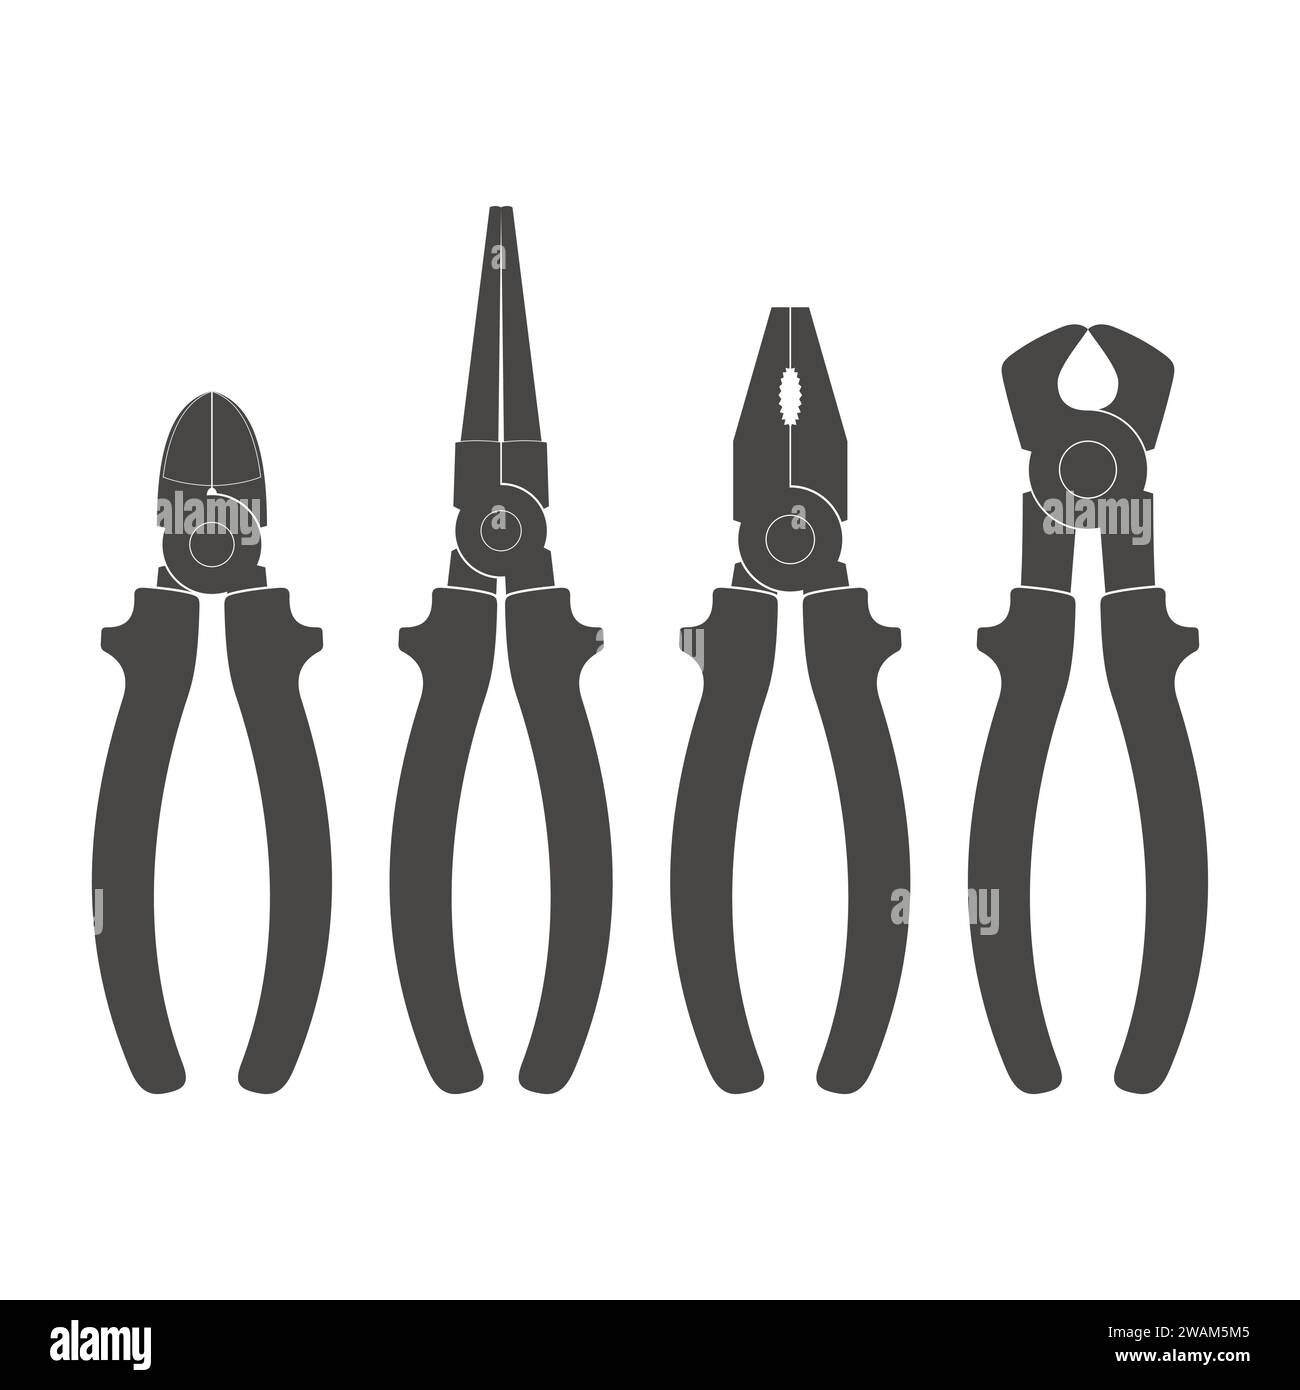 Set of different types of pliers and side cutters icons isolated on white background. Builder, construction and repair hand tools with plastic handles Stock Vector